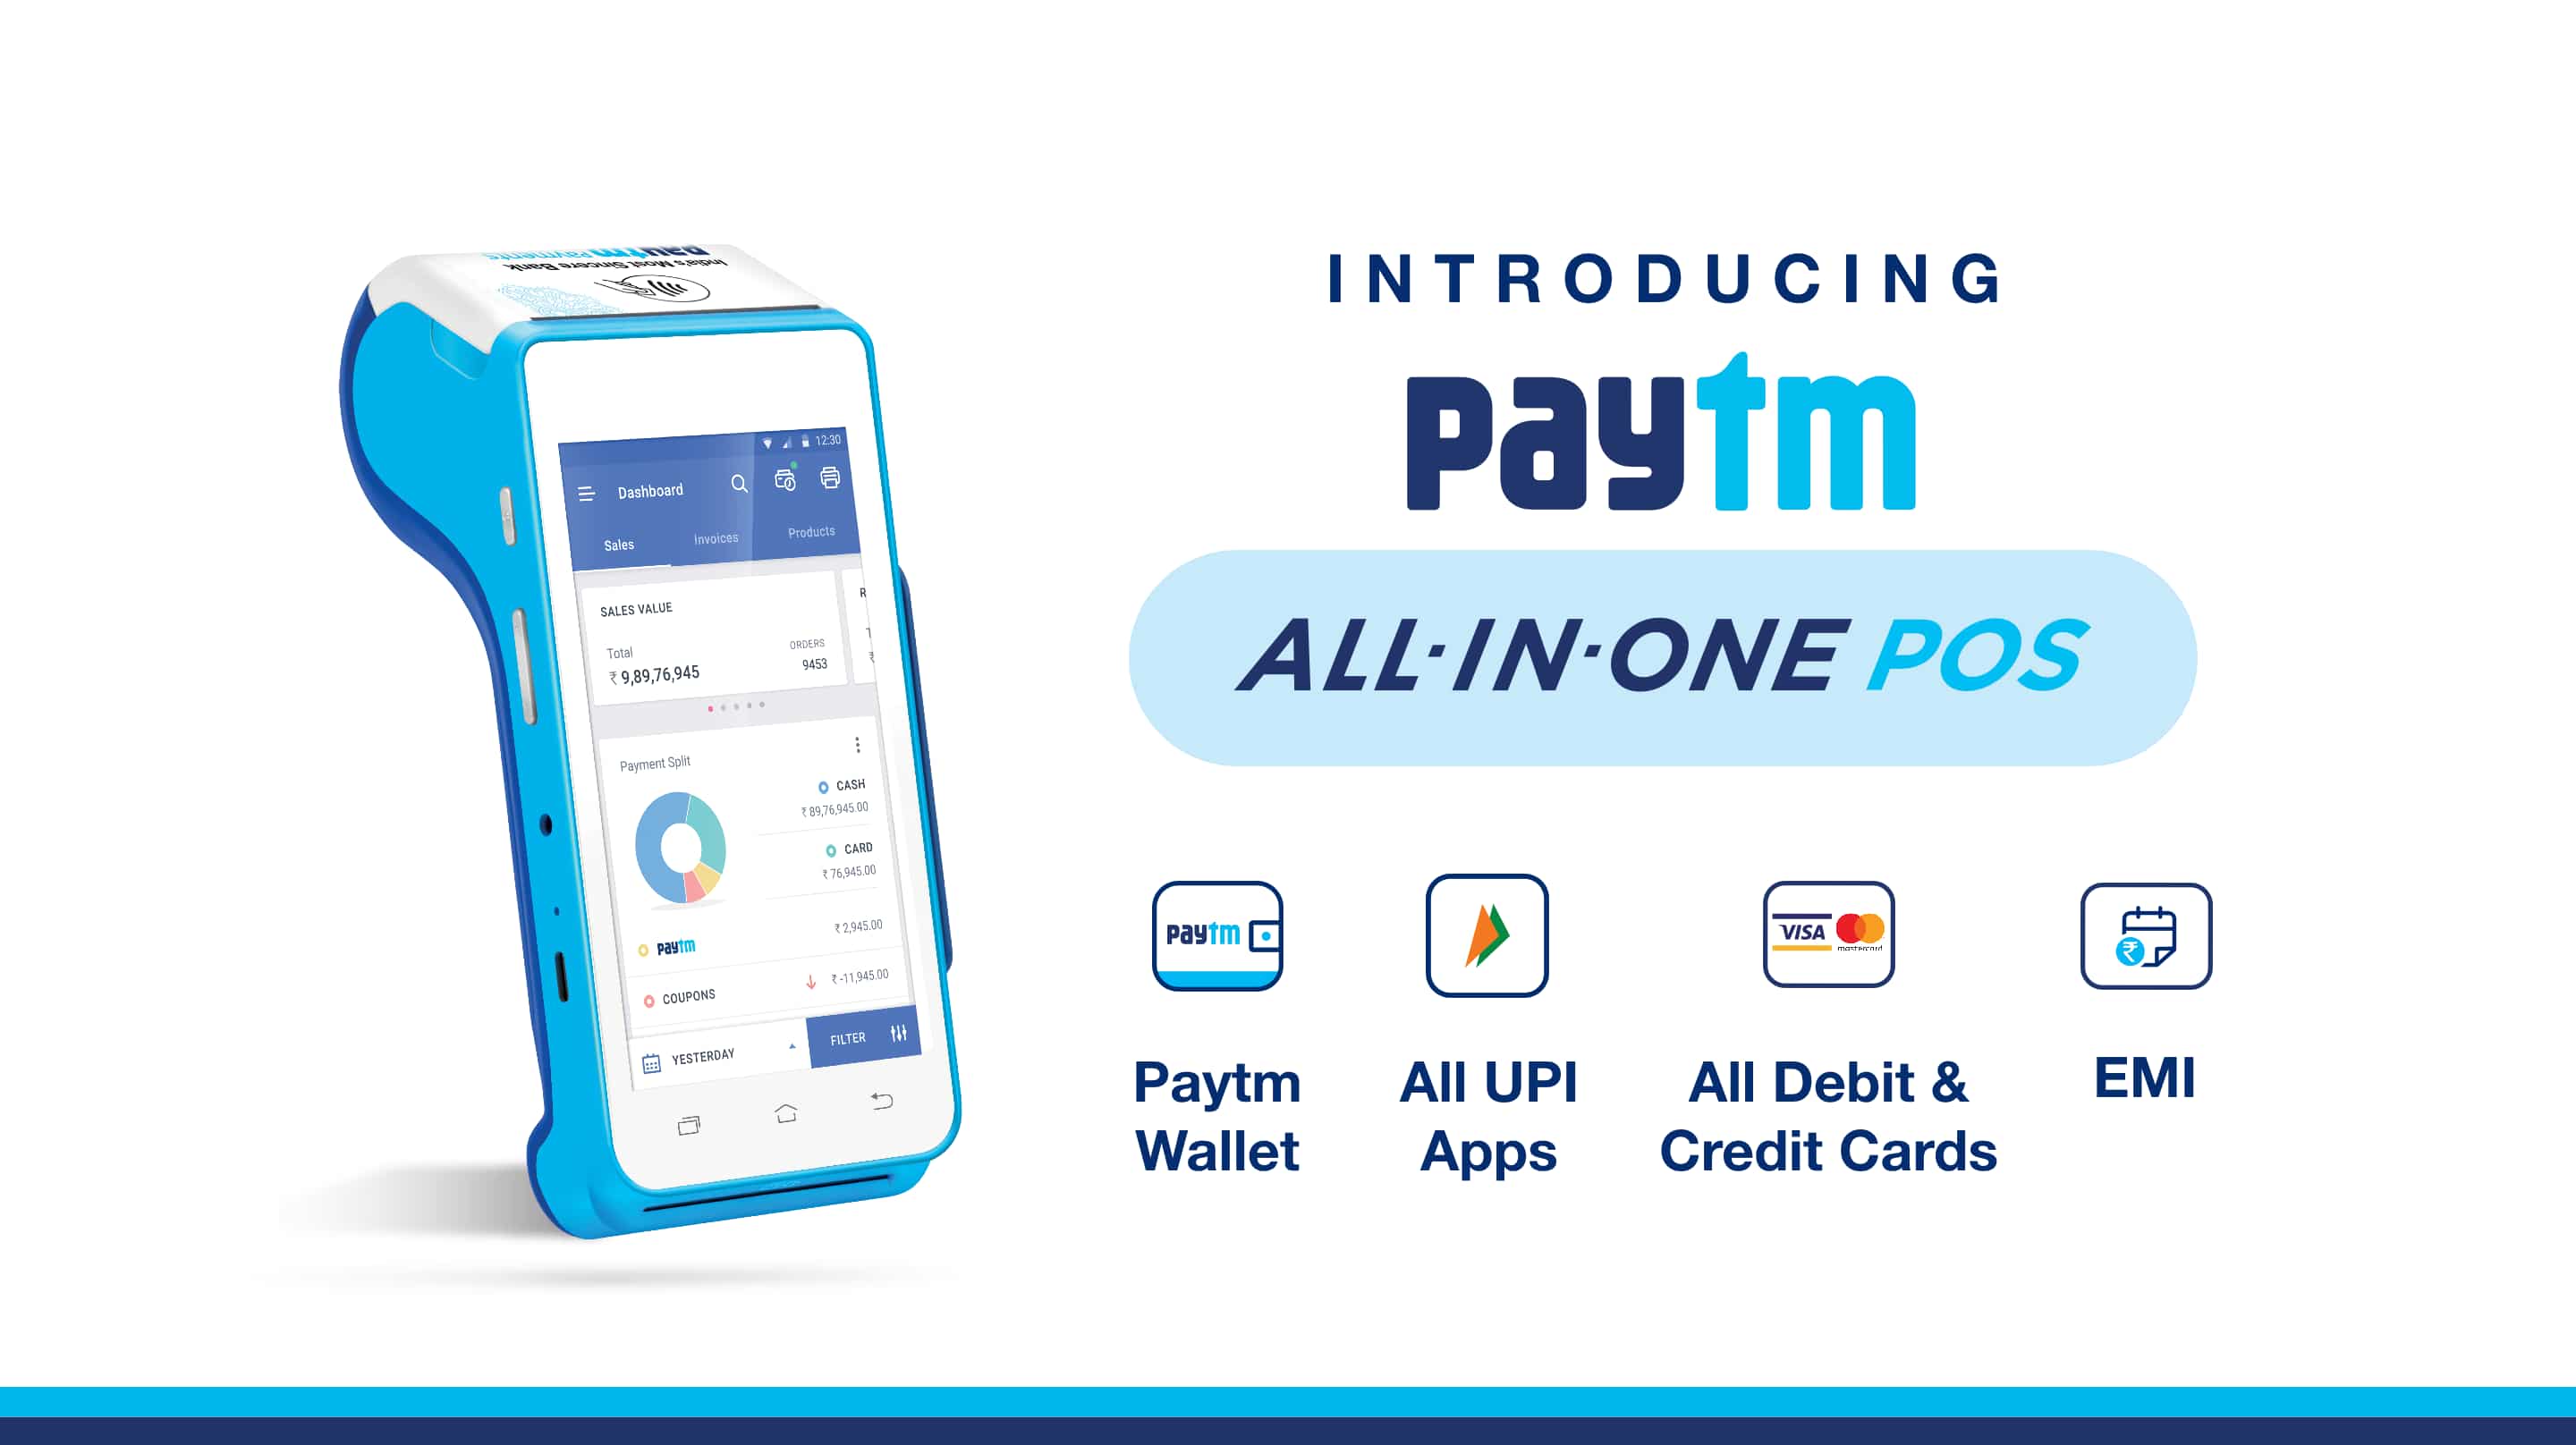 big paytm boost for small business! launches all-in-one android pos | zee business